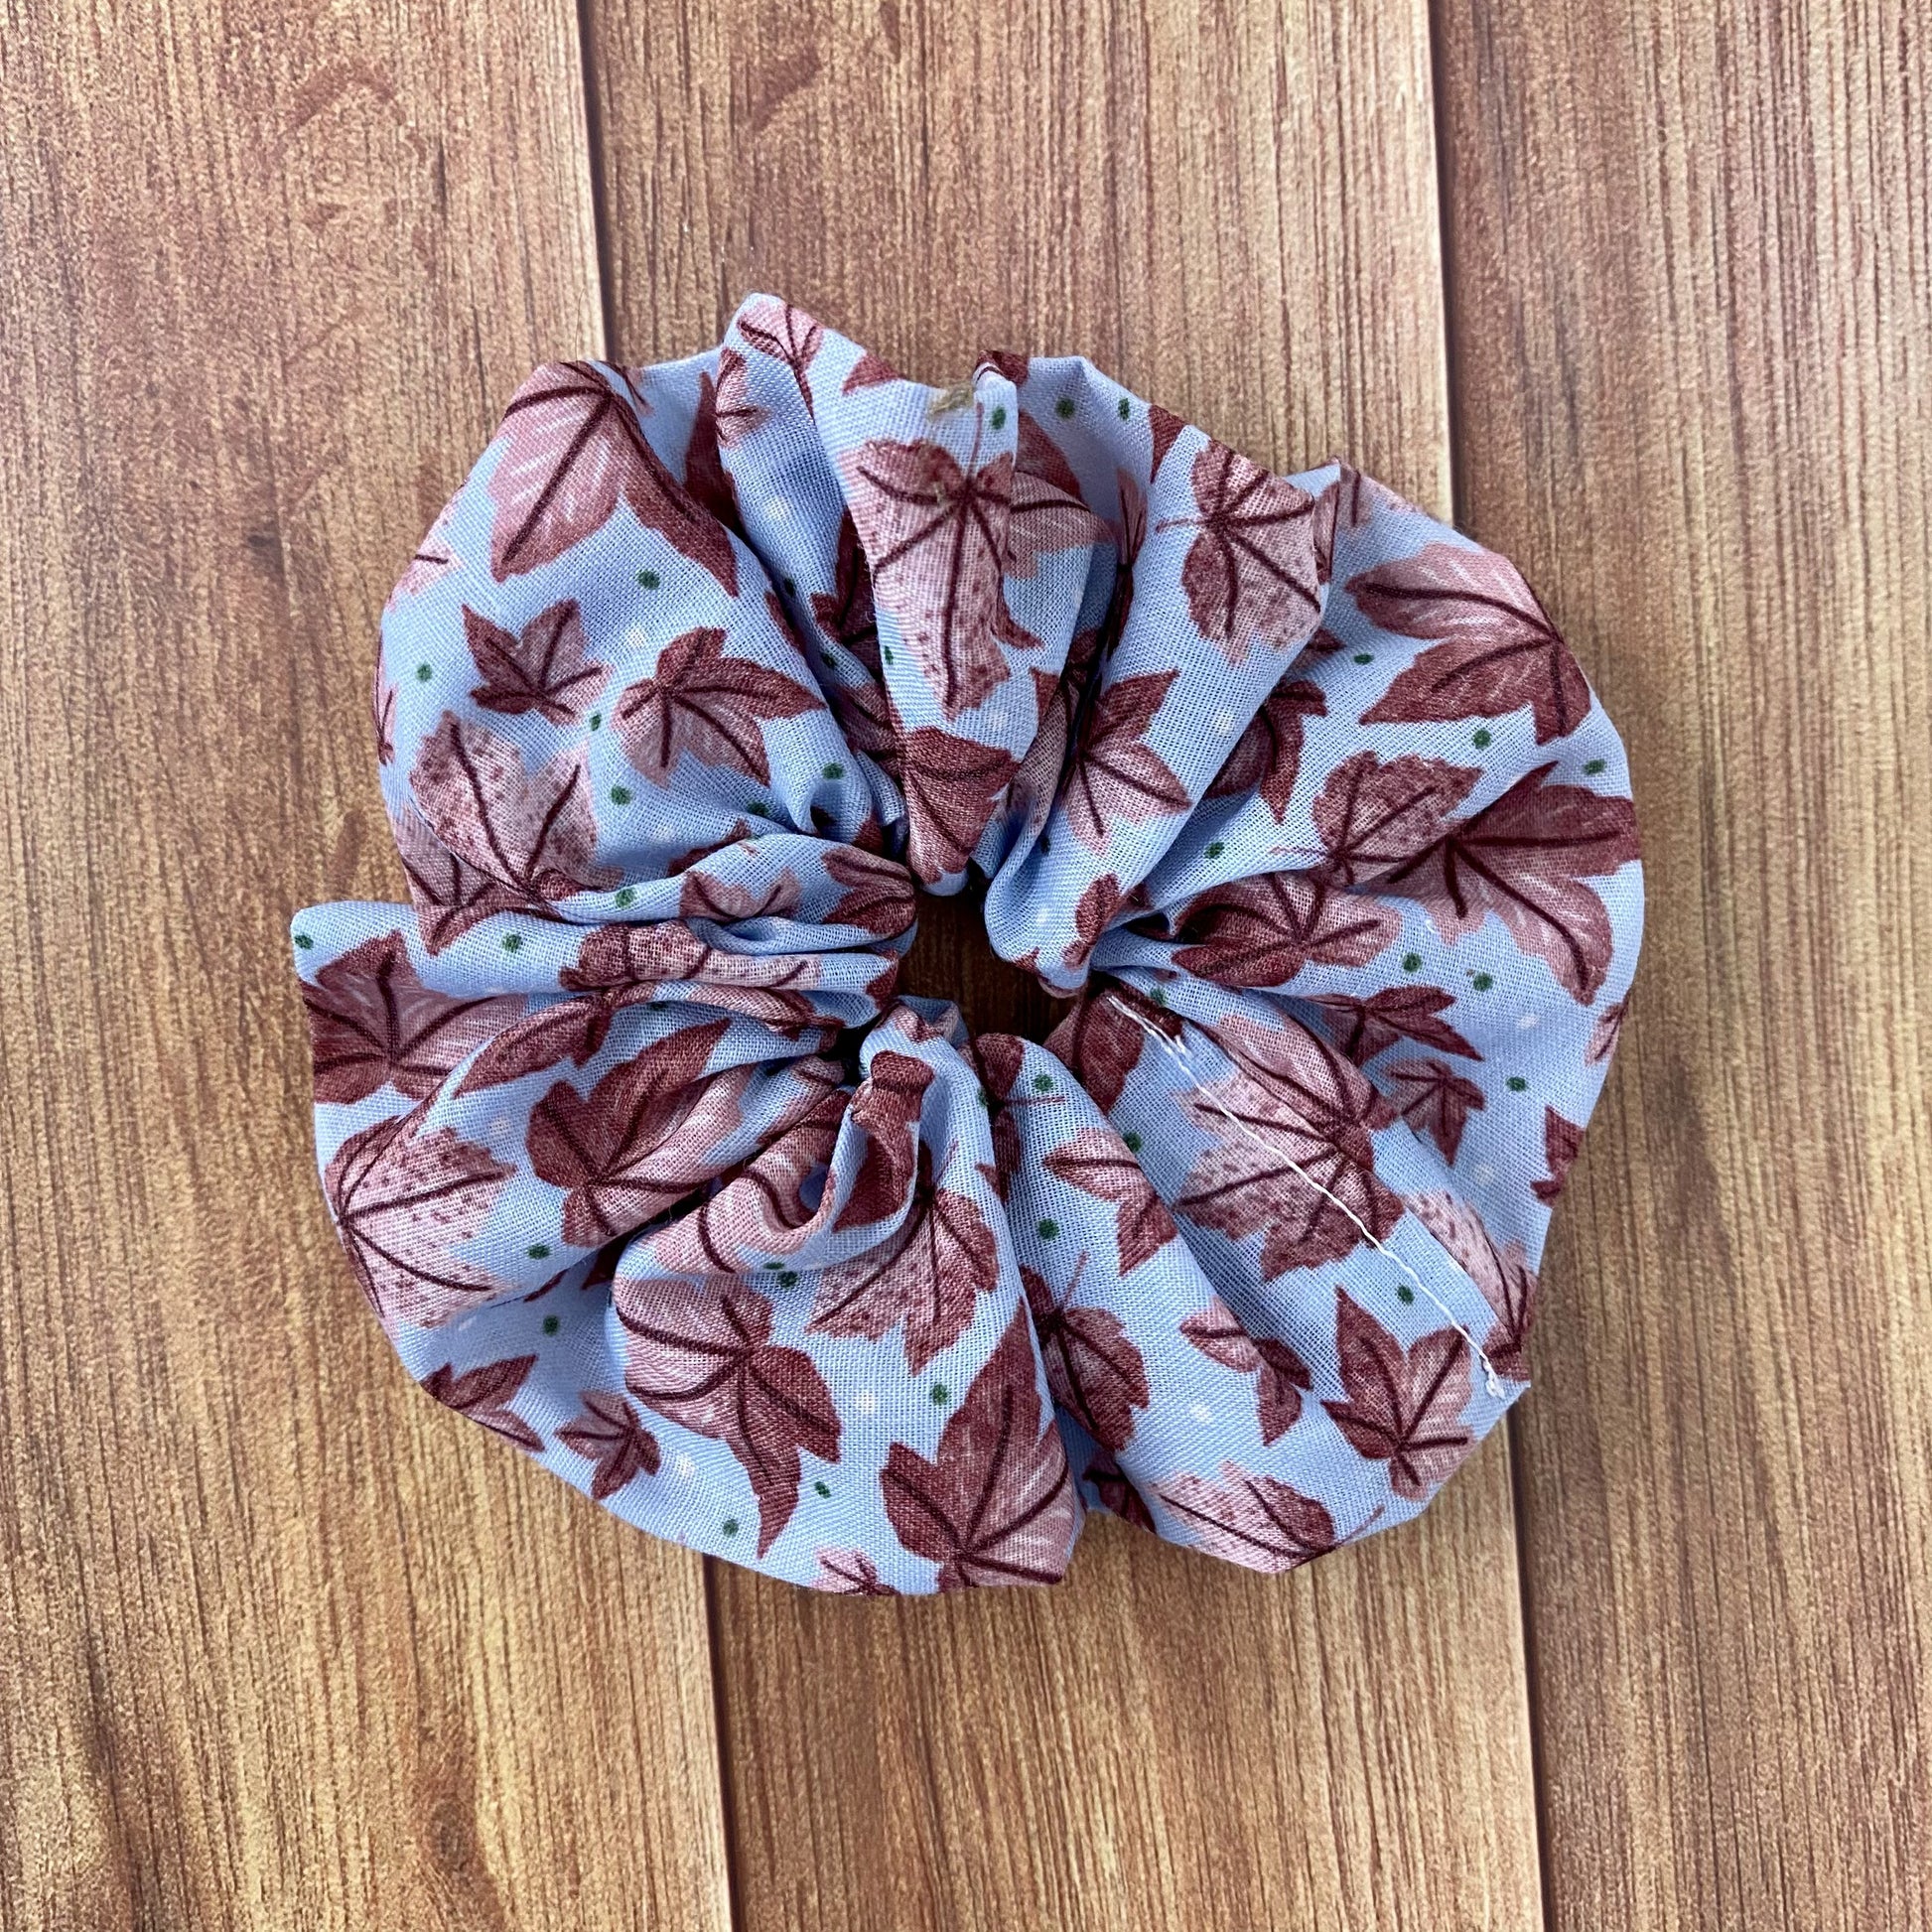 pink leafy patterned scrunchie on wooden surface 